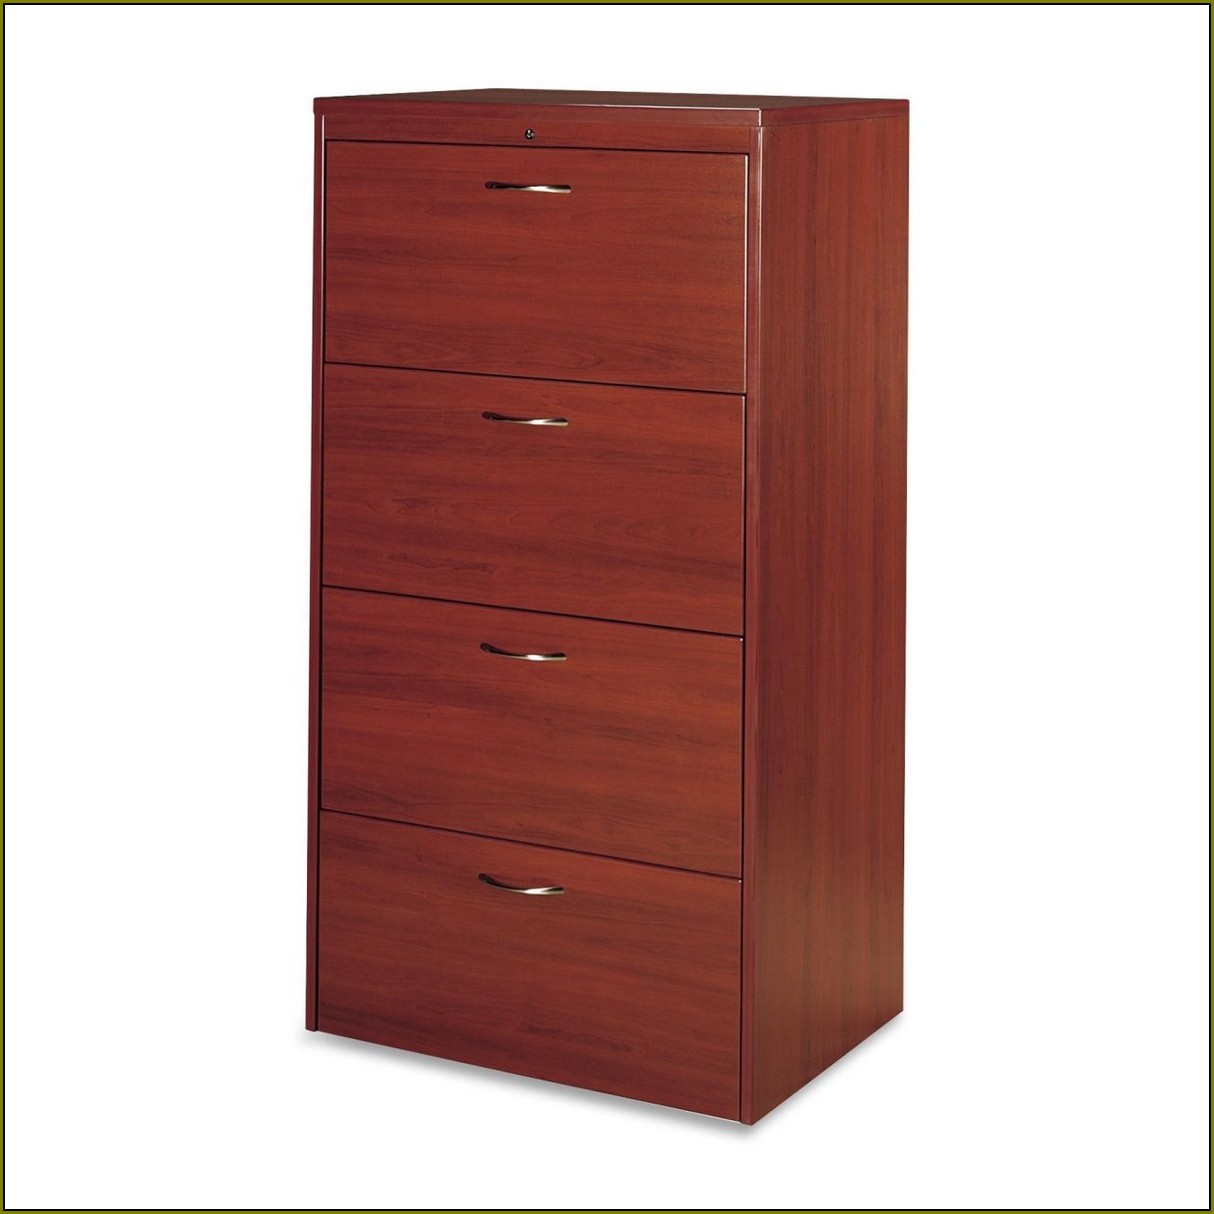 4 Drawer Wood File Cabinet Cherry